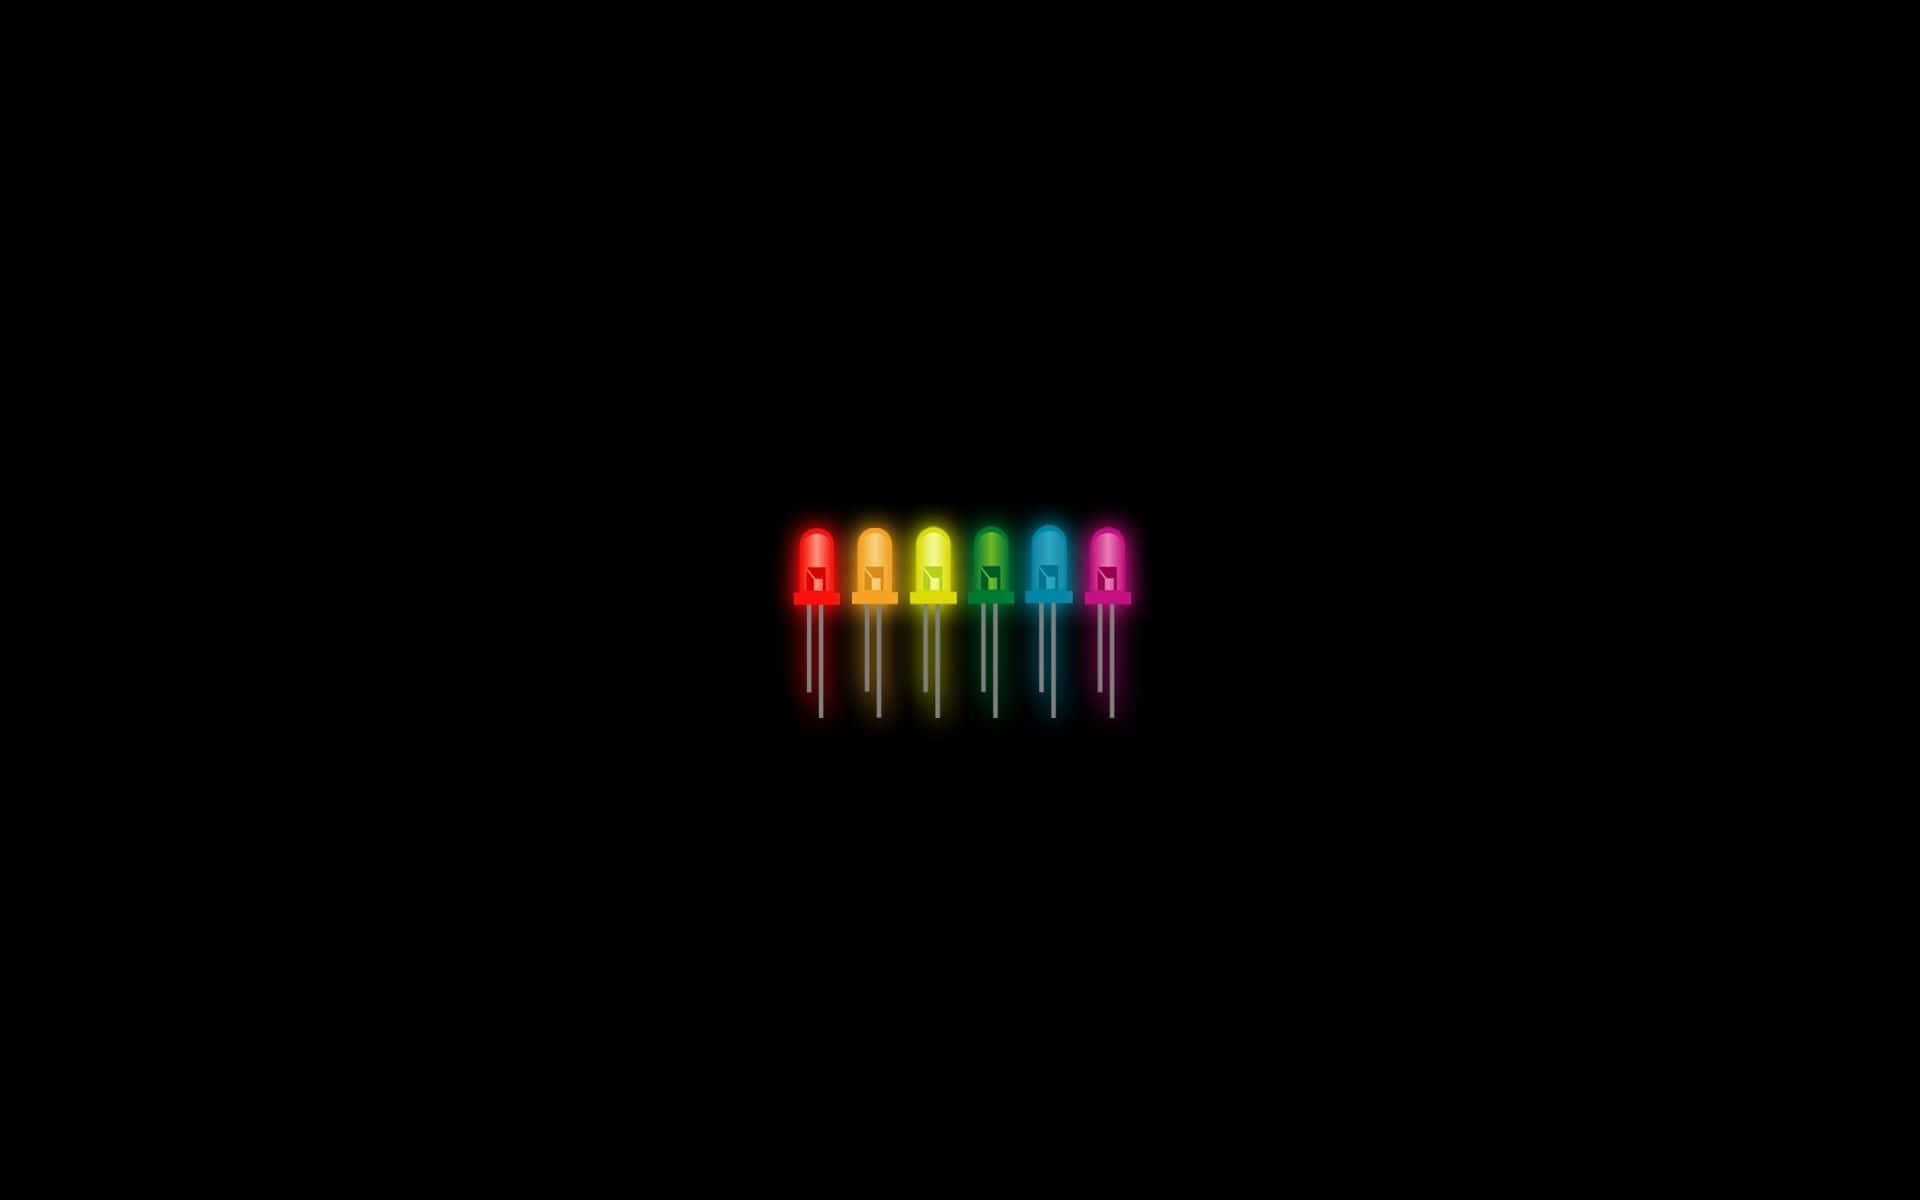 A Black Background With Colorful Lights On It